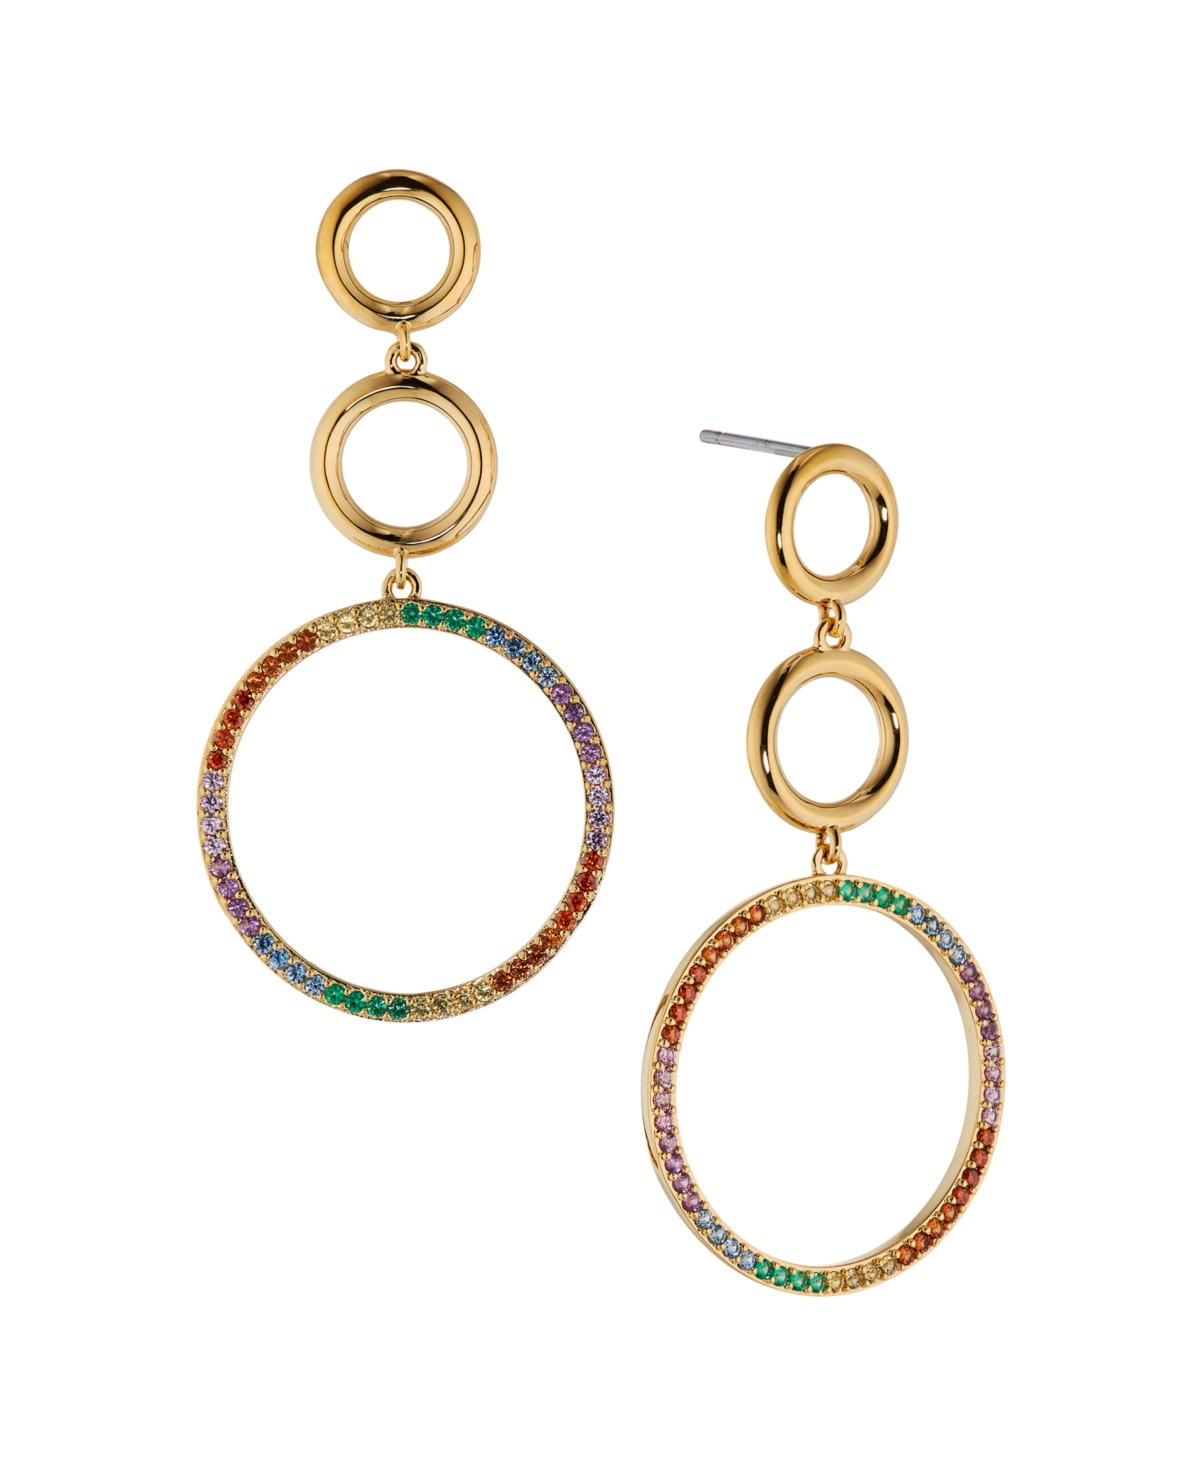 Ava Nadri Multi Color Circle Drop Earring in 18K Gold Plated Brass